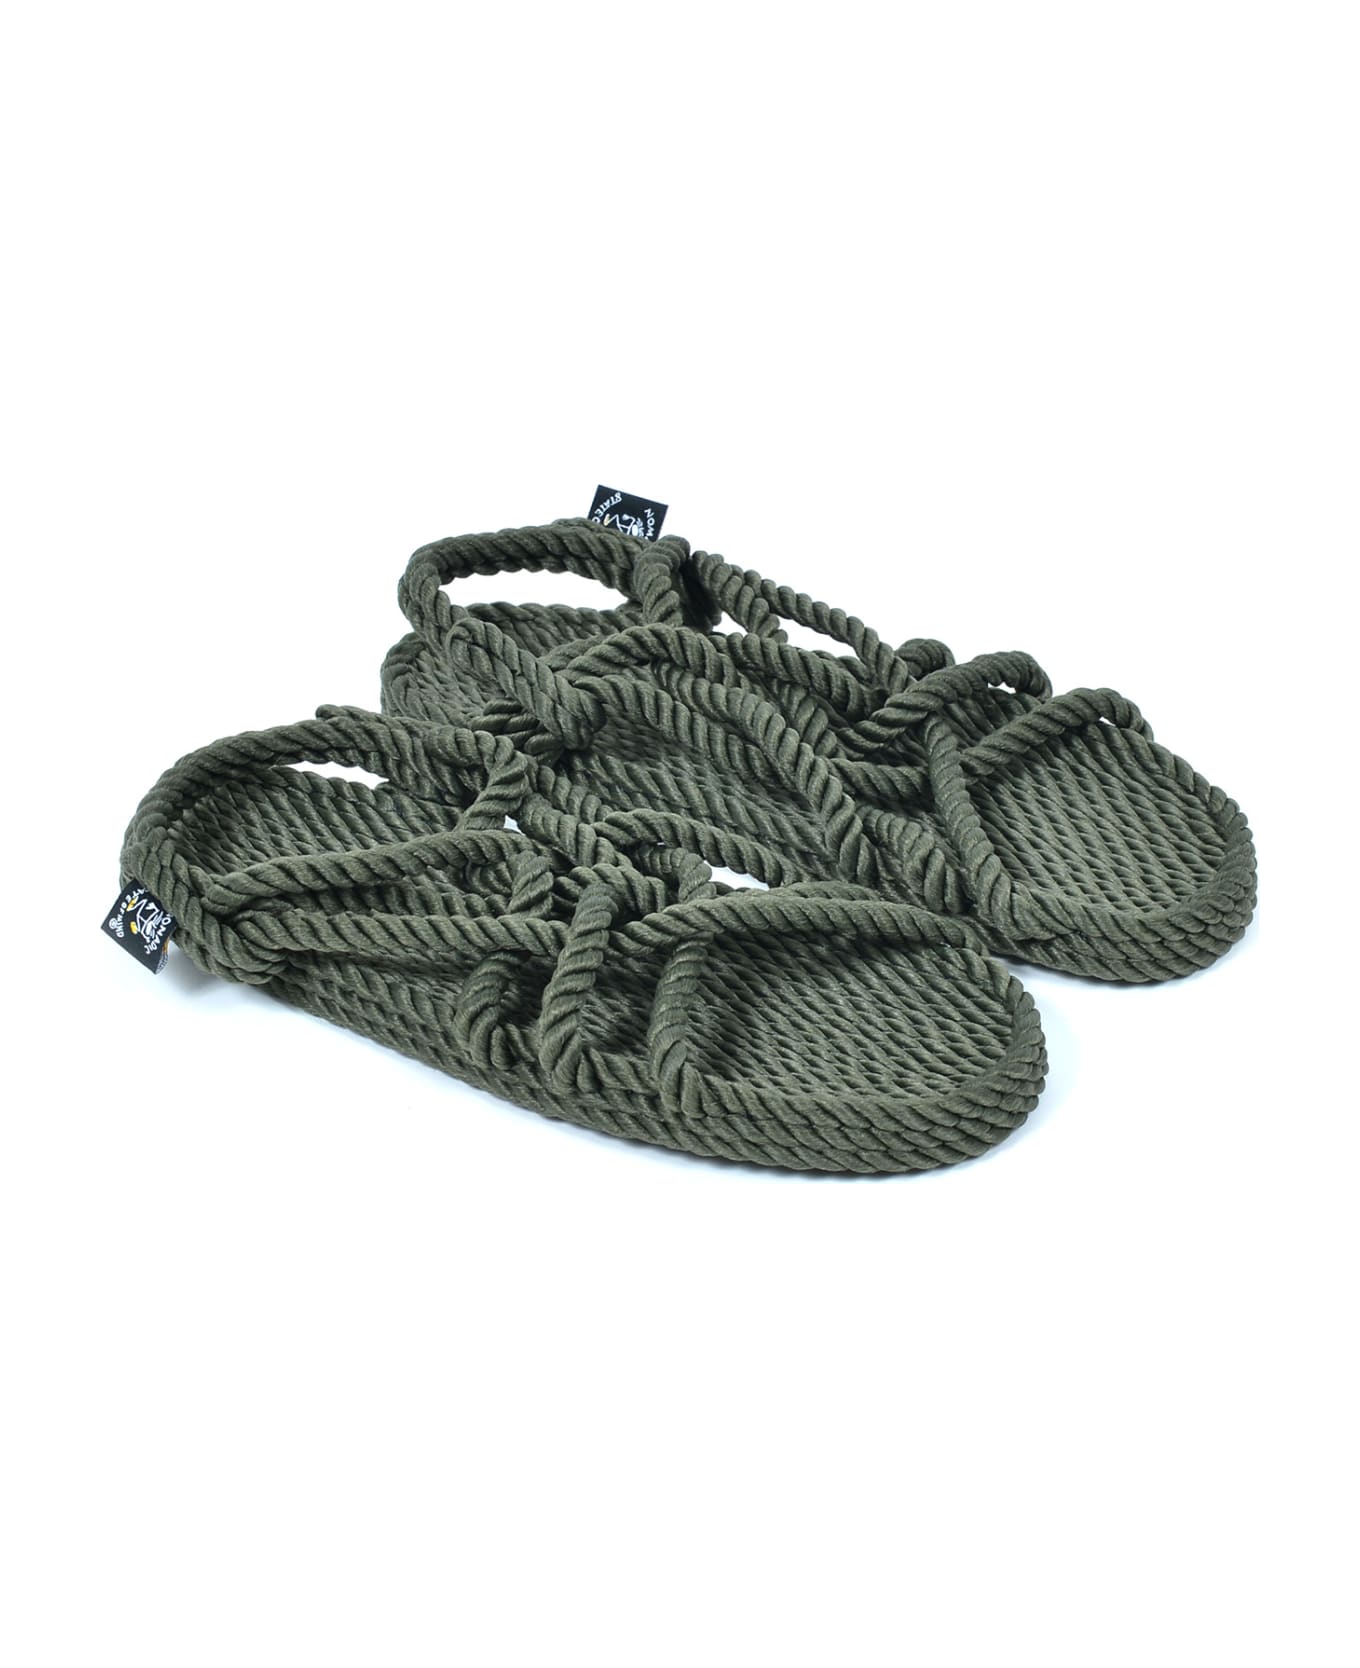 Nomadic State of Mind Sandals Military - Military